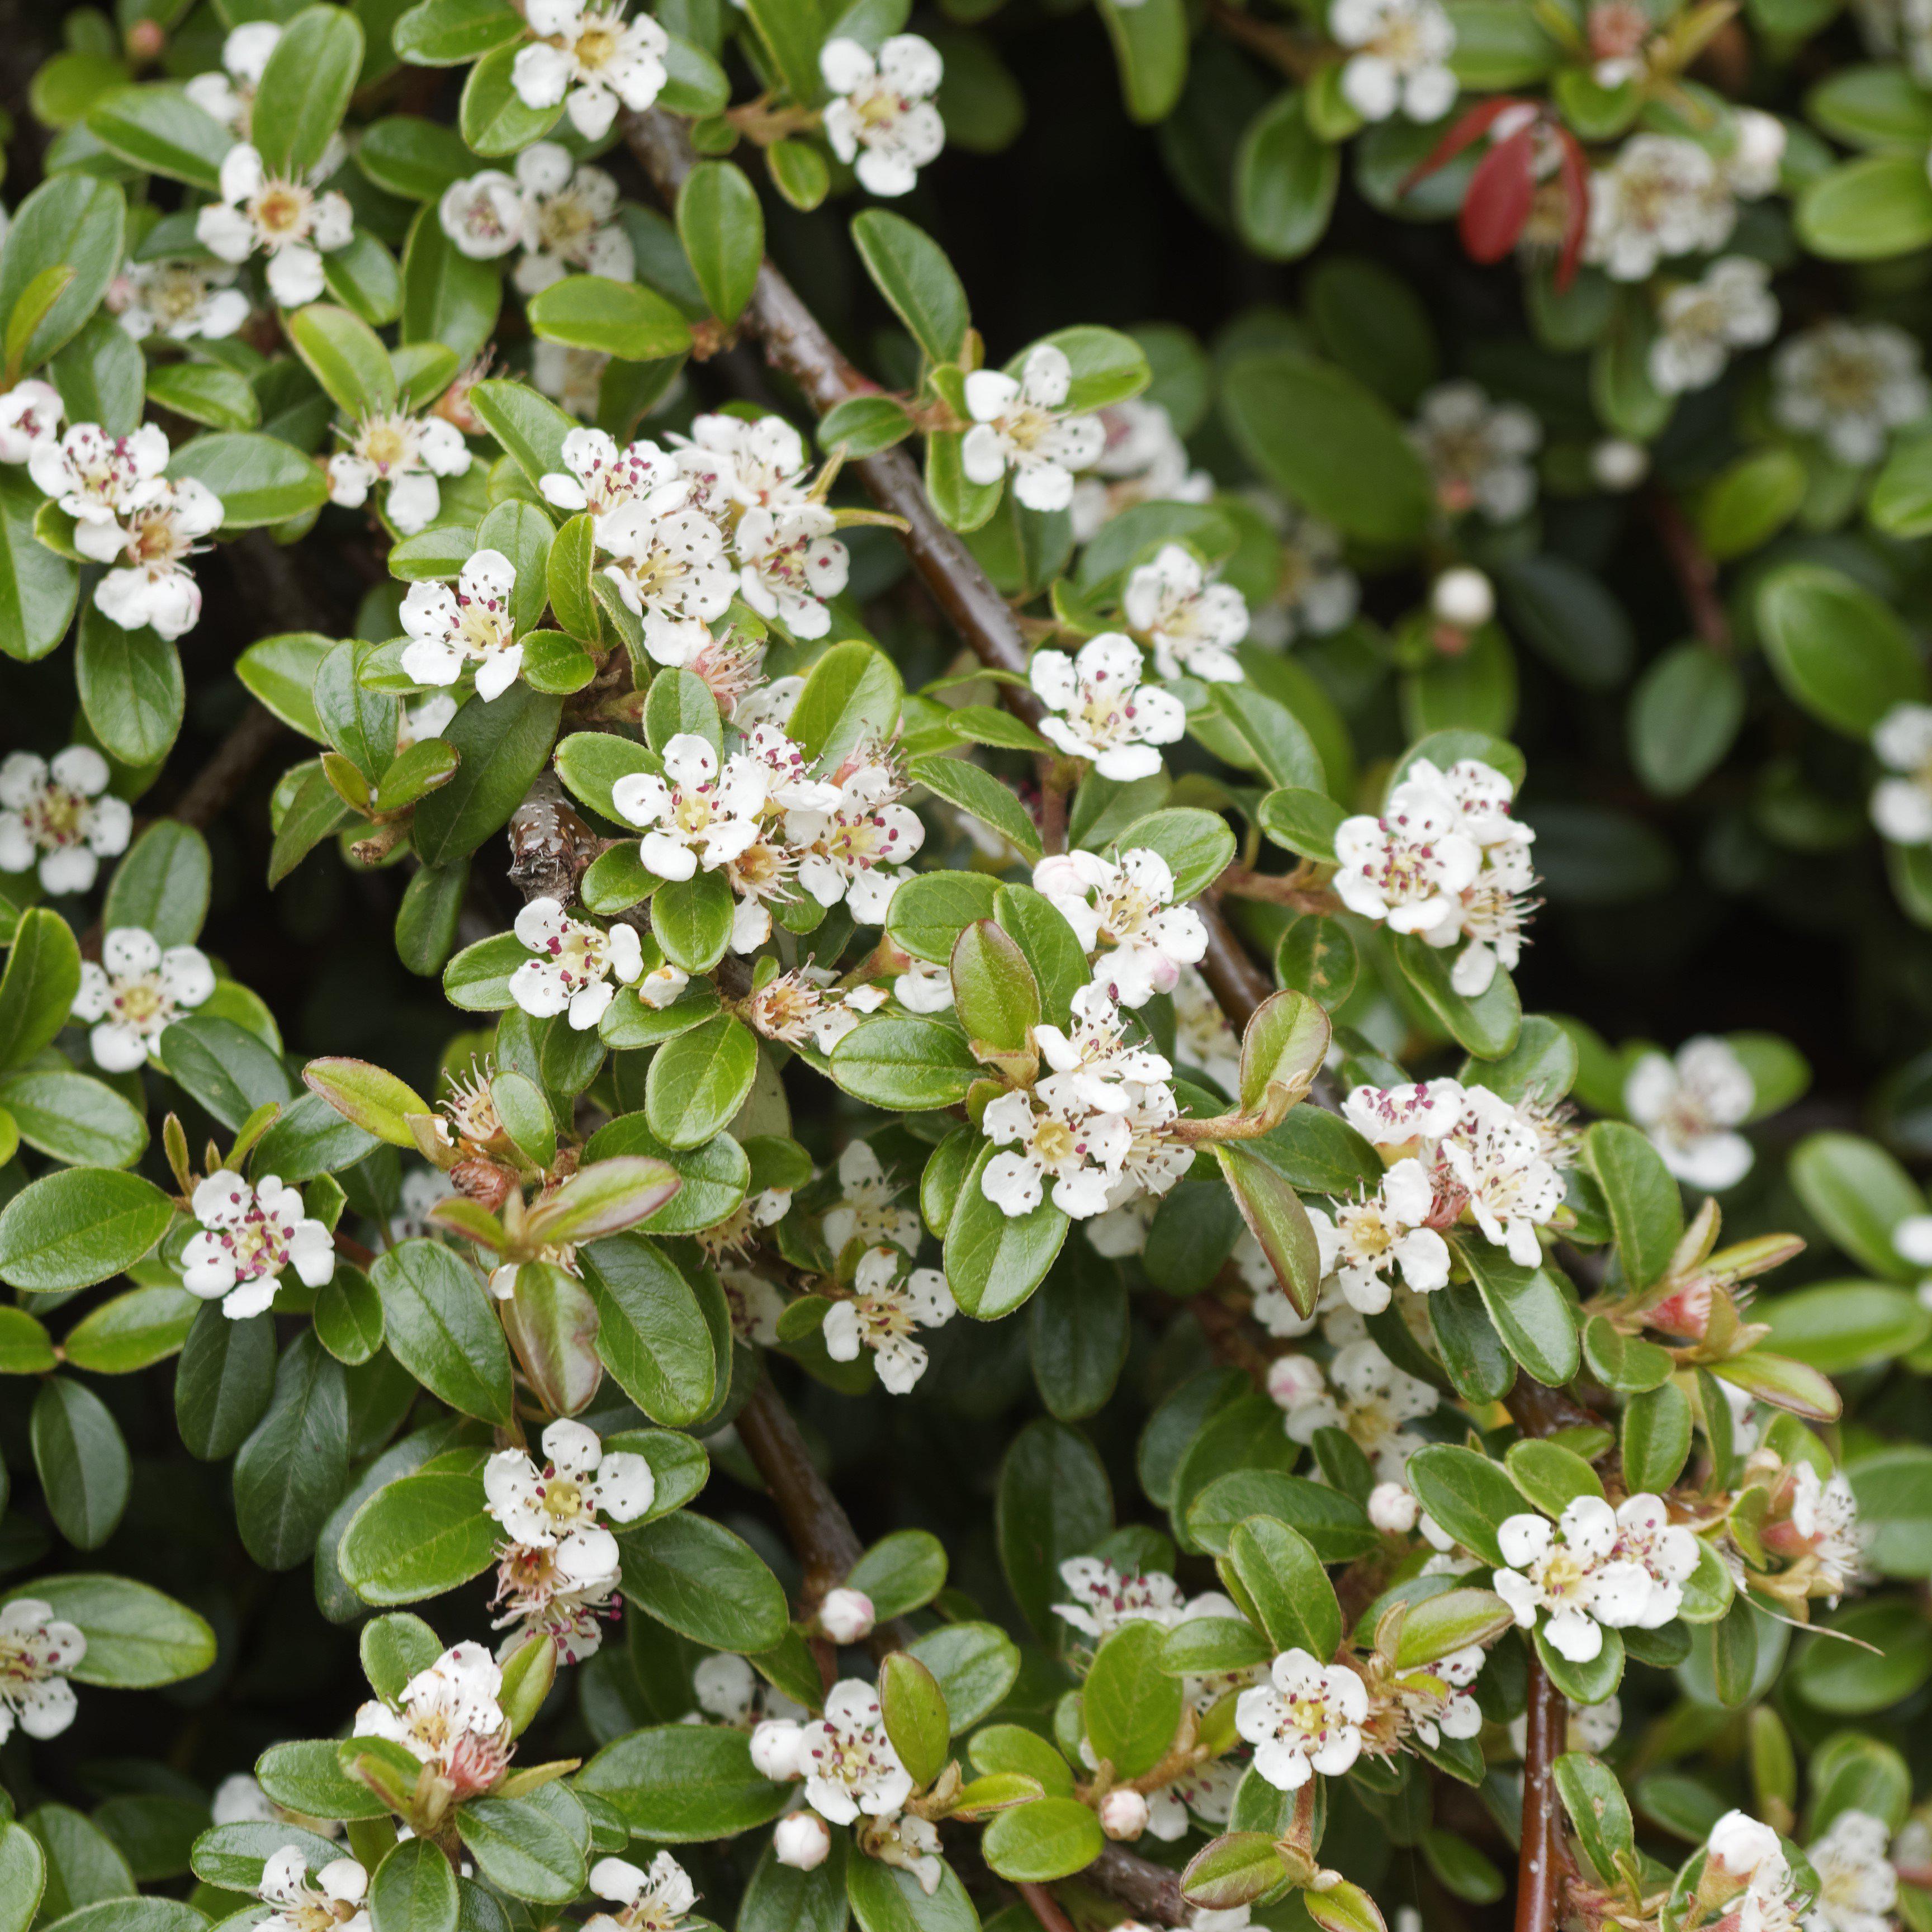 Cotoneaster dammeri 'Coral Beauty' ~ Coral Beauty Cotoneaster